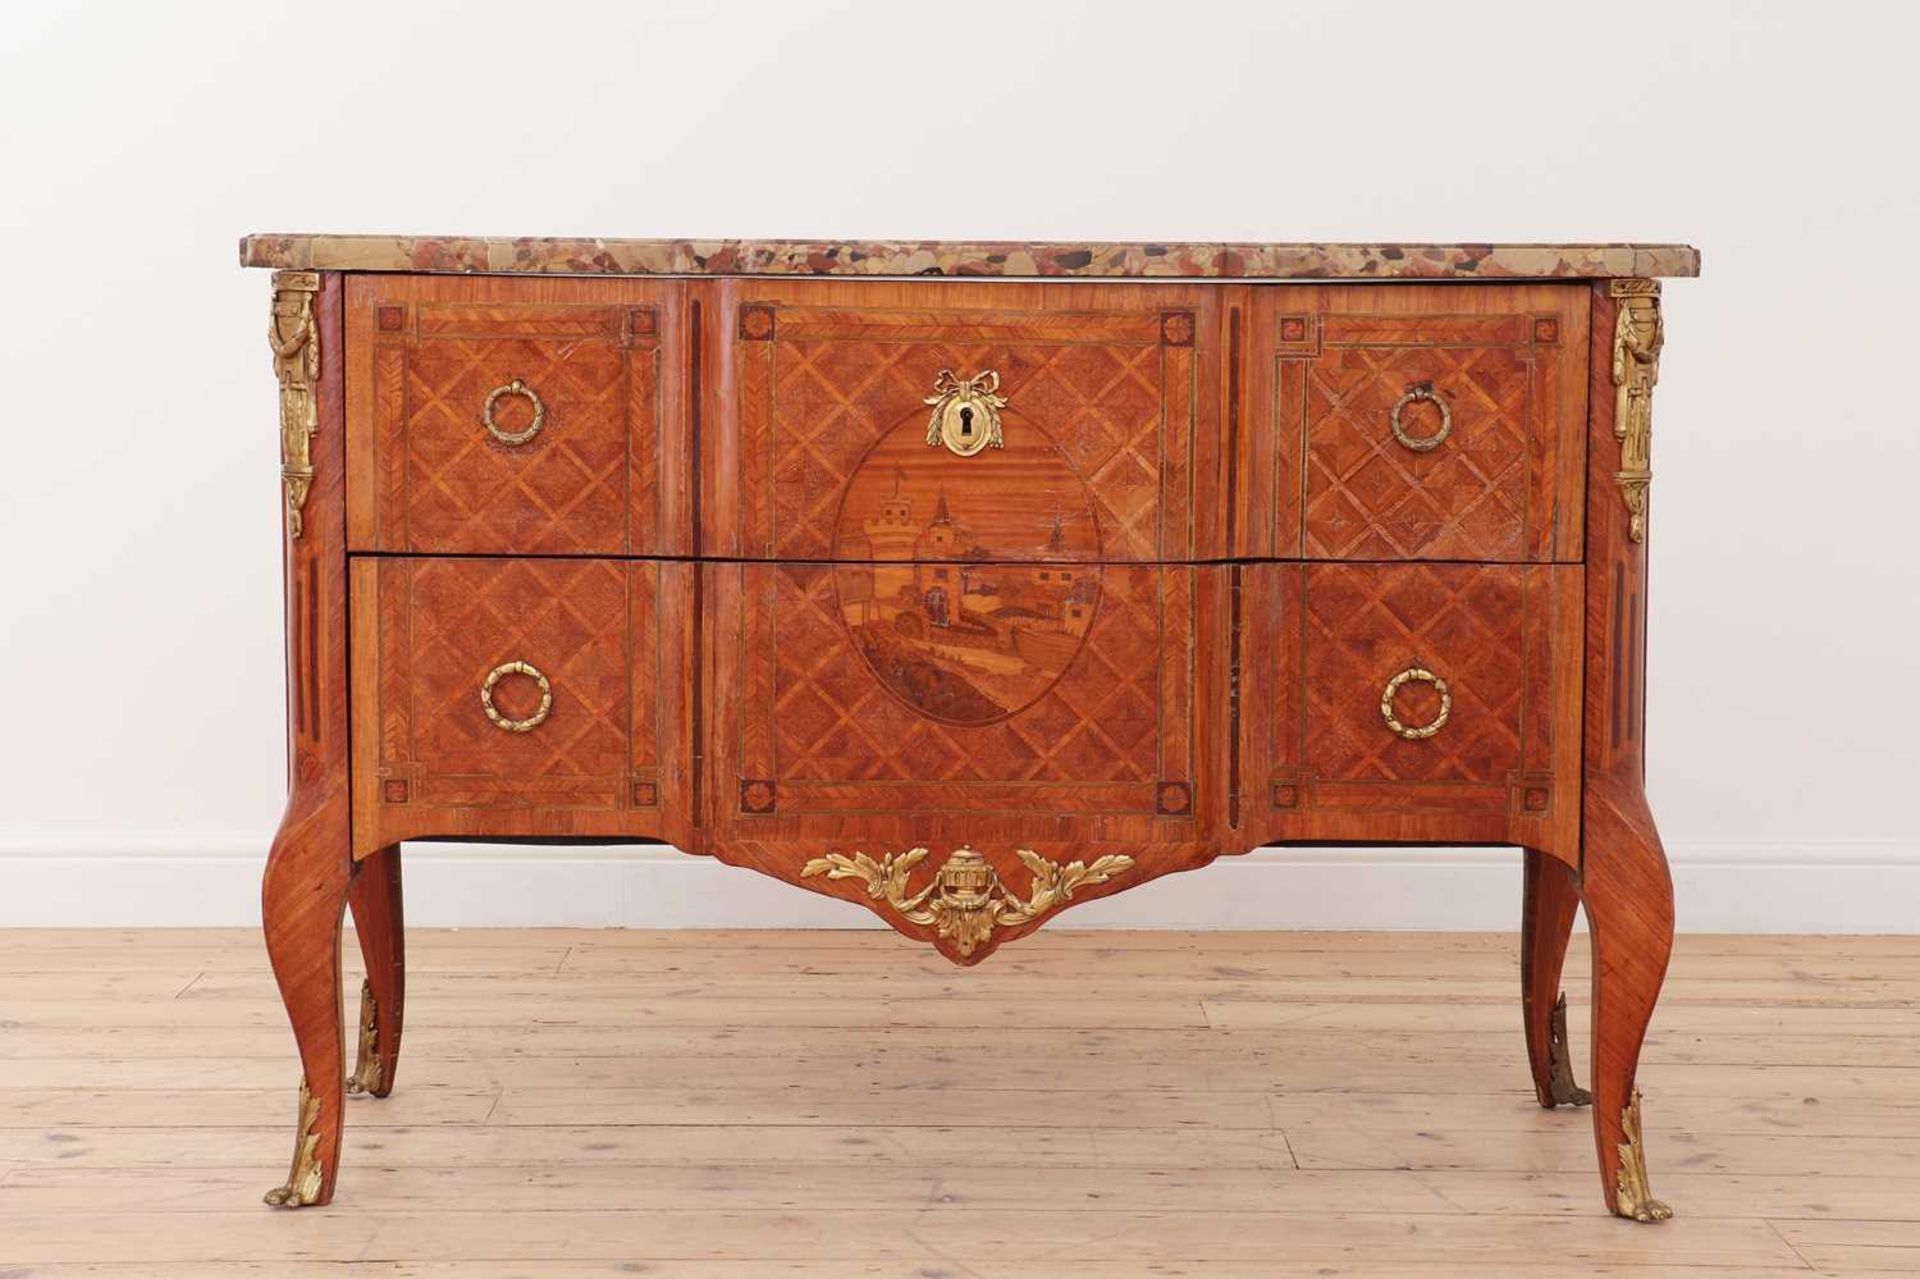 A transitional kingwood, tulipwood and marquetry commode